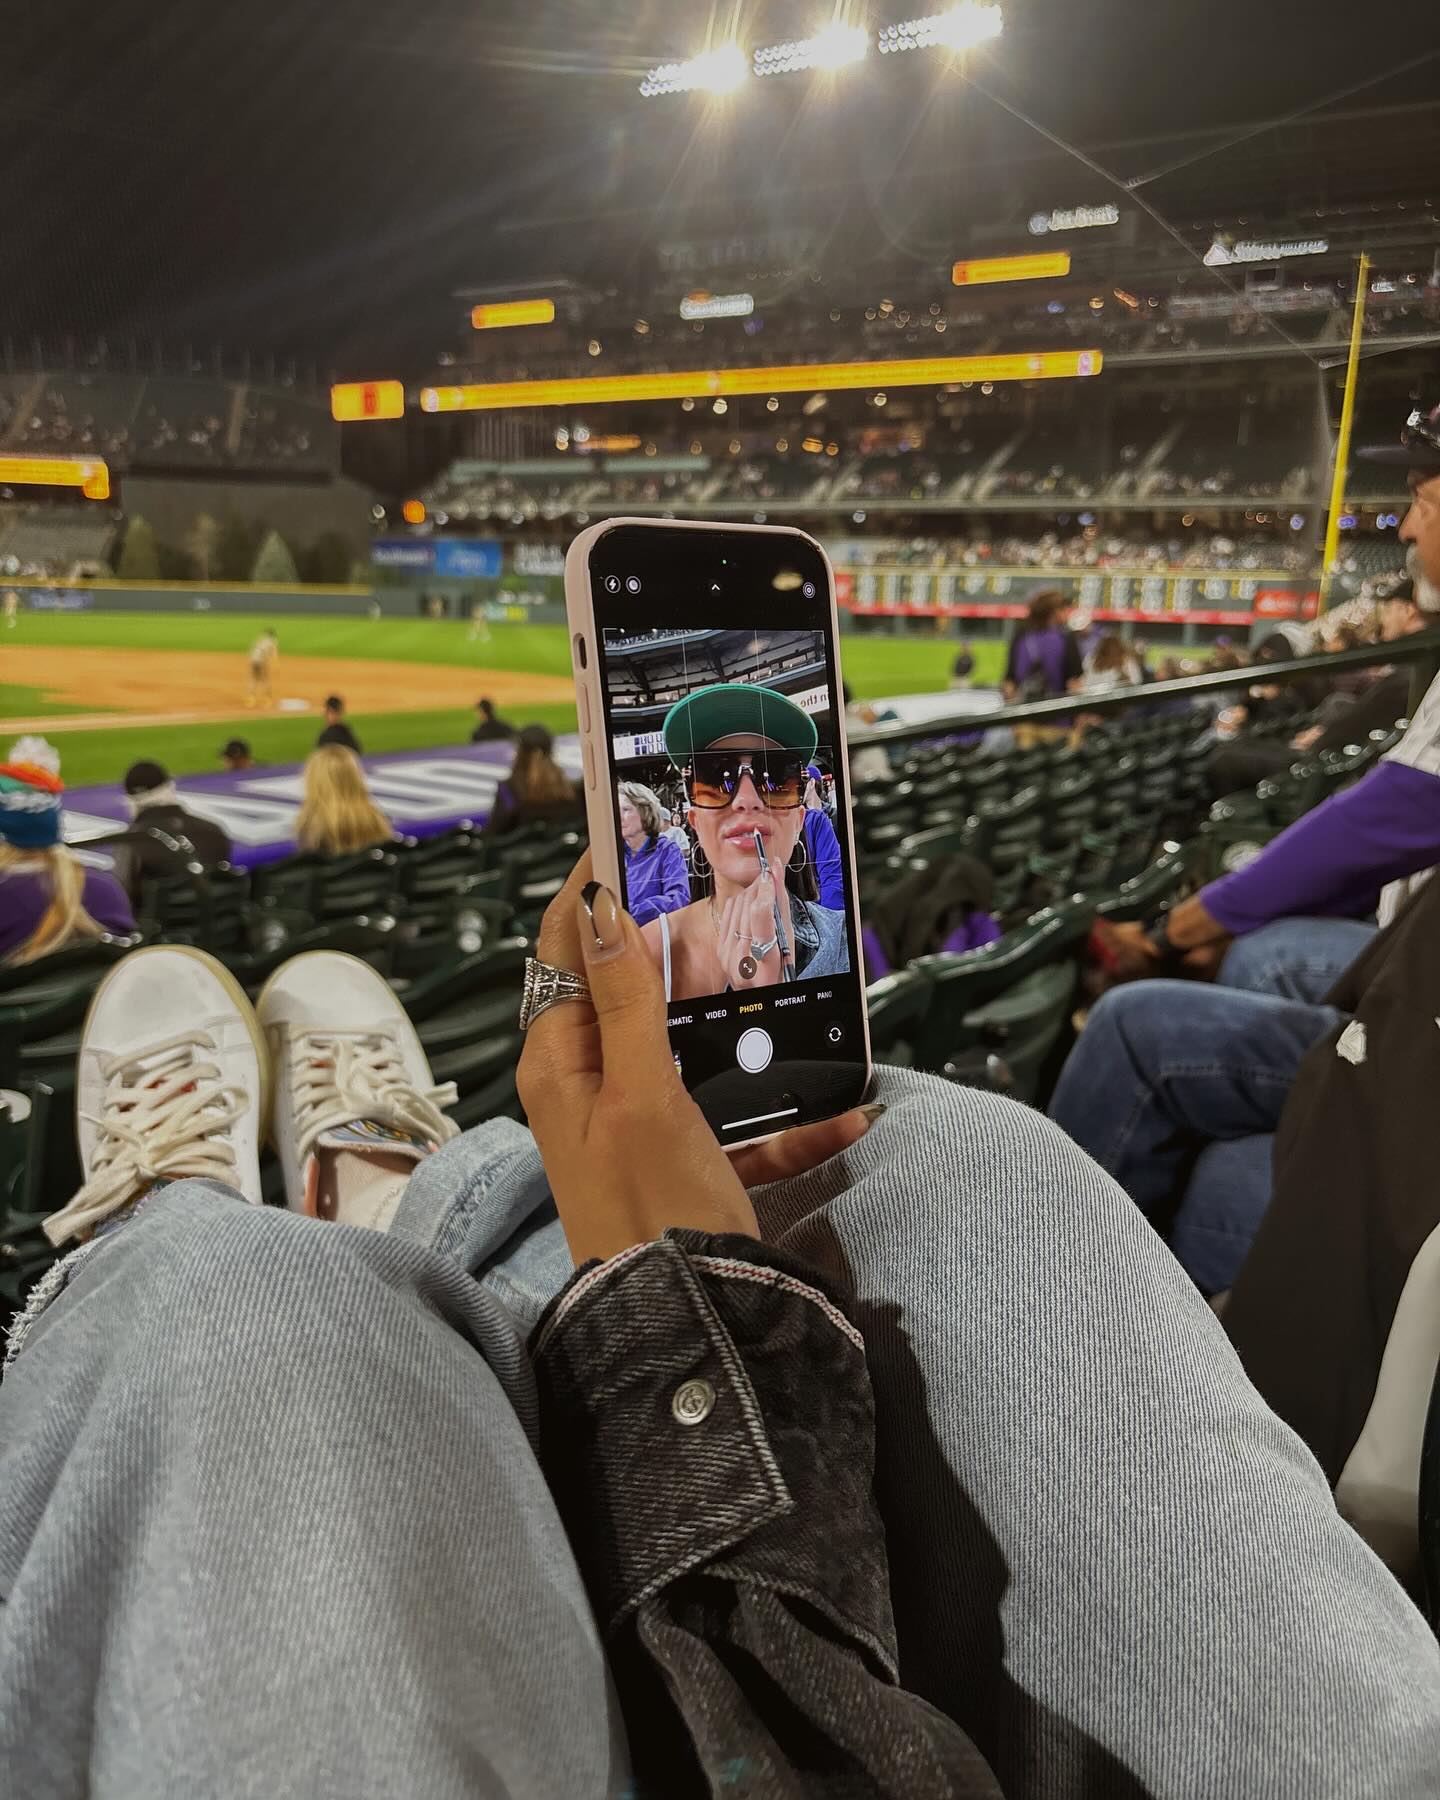 having fun with @teamseatgeek ⚾️
use code TAYTHATCHERR for $20 off any tickets <3